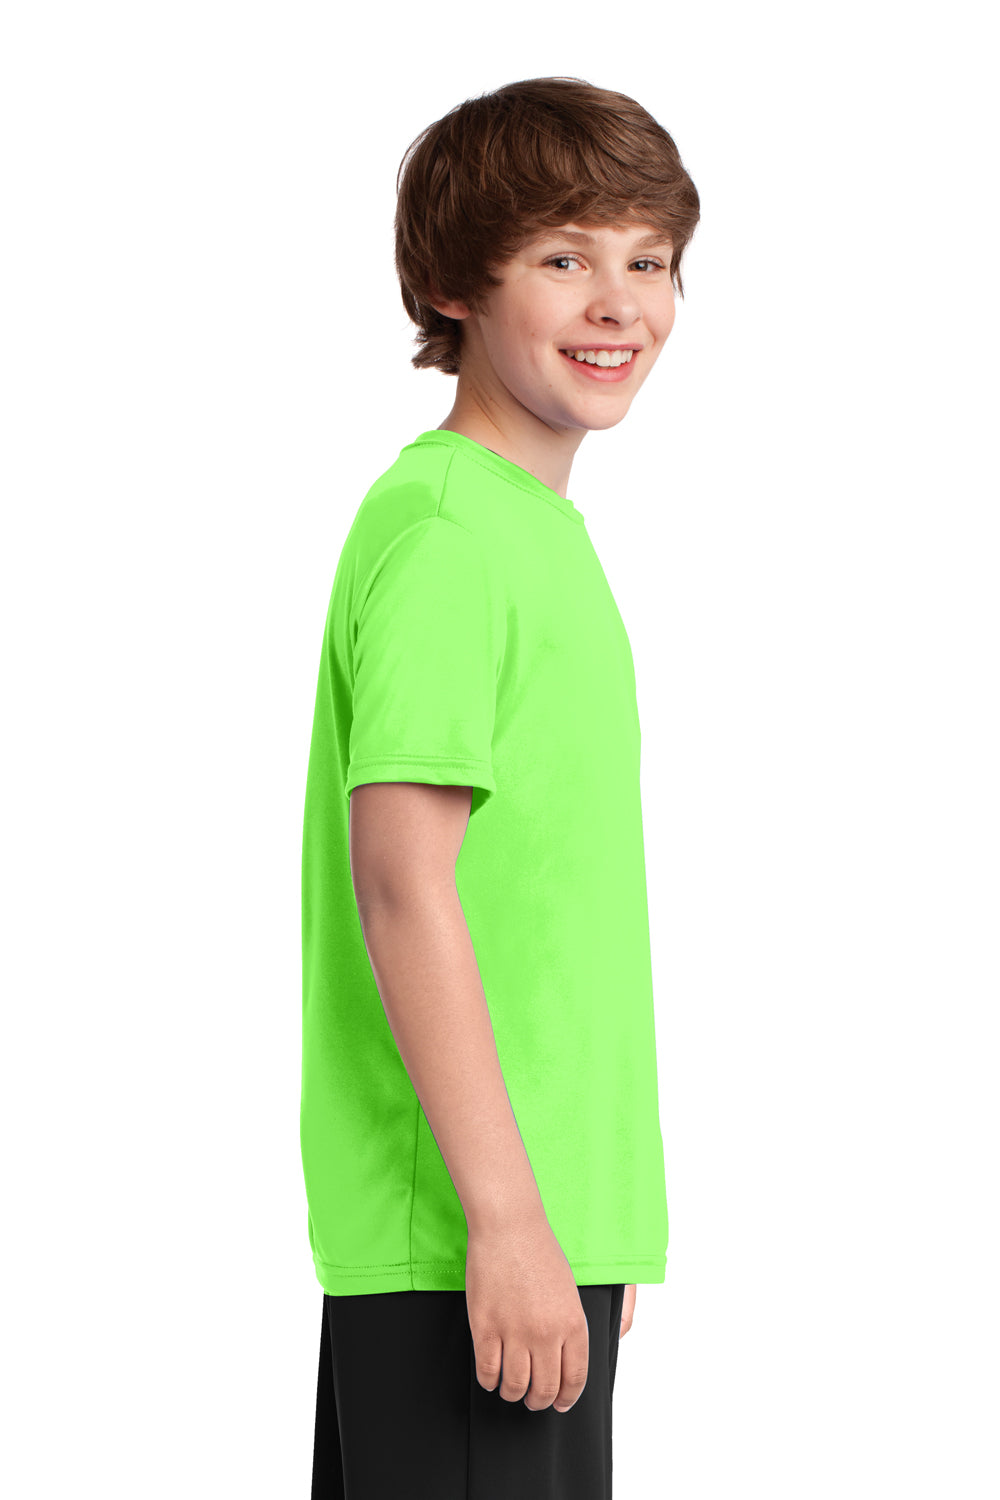 Port & Company PC380Y Youth Dry Zone Performance Moisture Wicking Short Sleeve Crewneck T-Shirt Neon Green Side